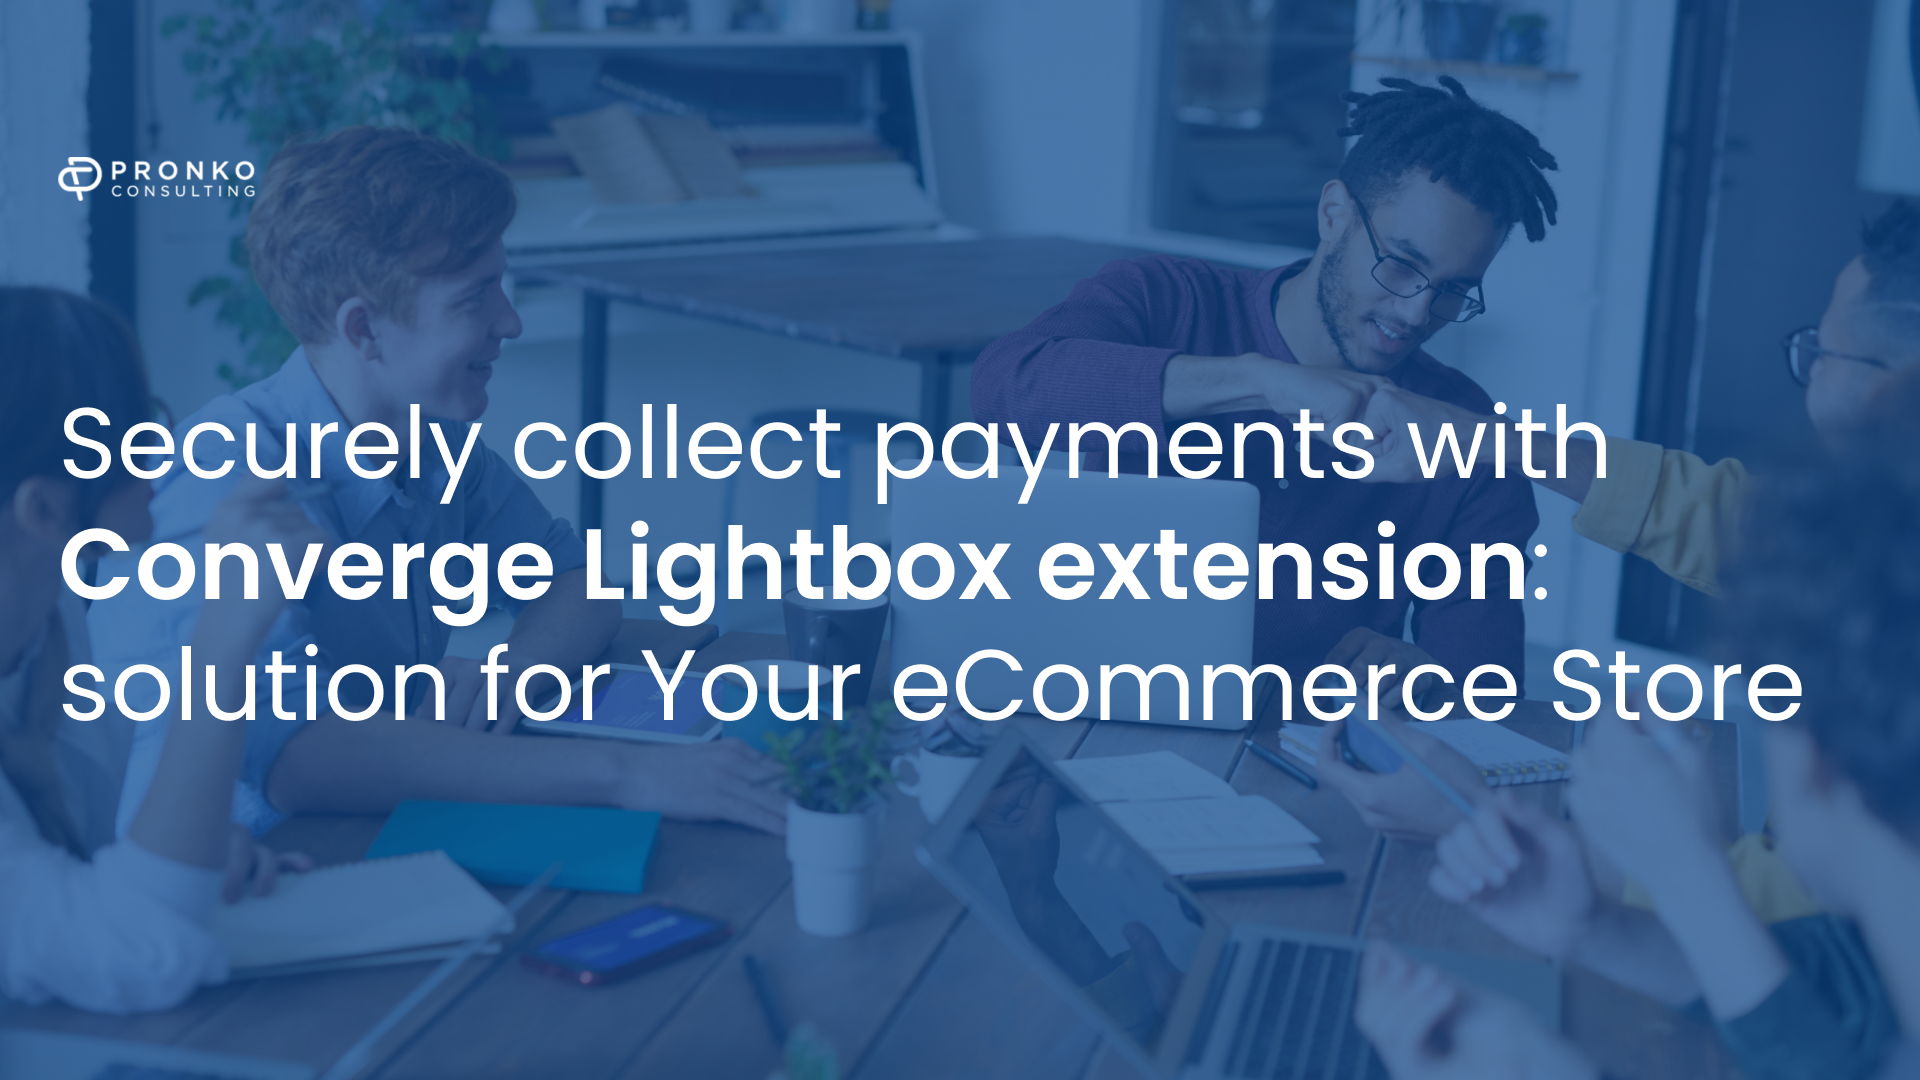 Collect payments securely with Converge Lightbox SAQ-A